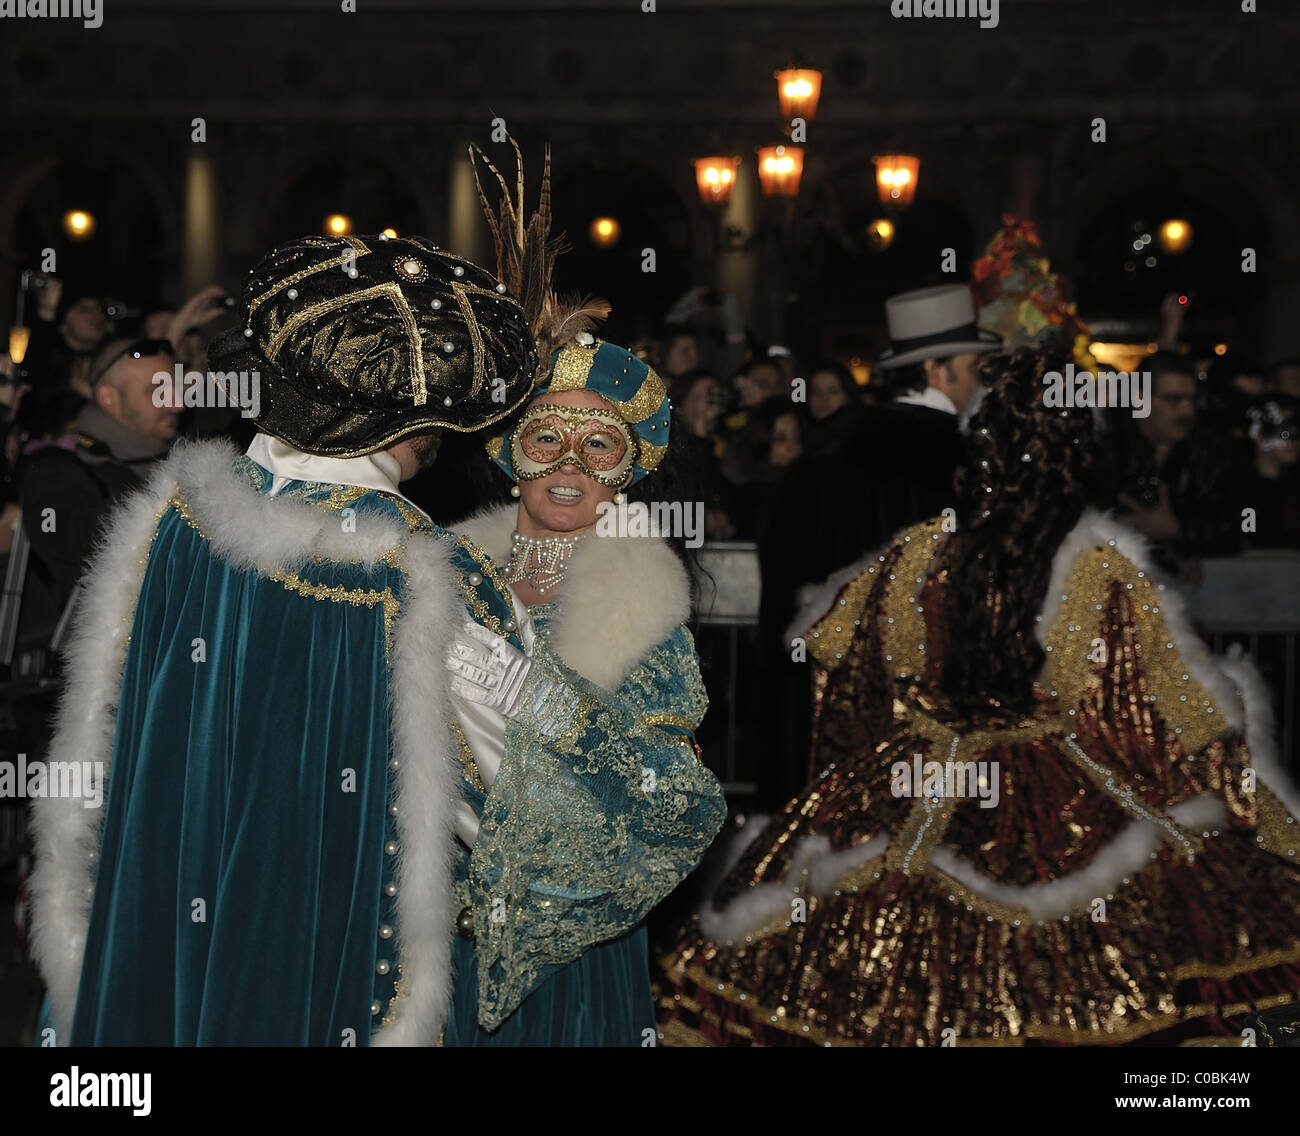 Members of the association 'Amici del Carnevale di Venezia dancing in San Marco during the opening of the carnival Stock Photo